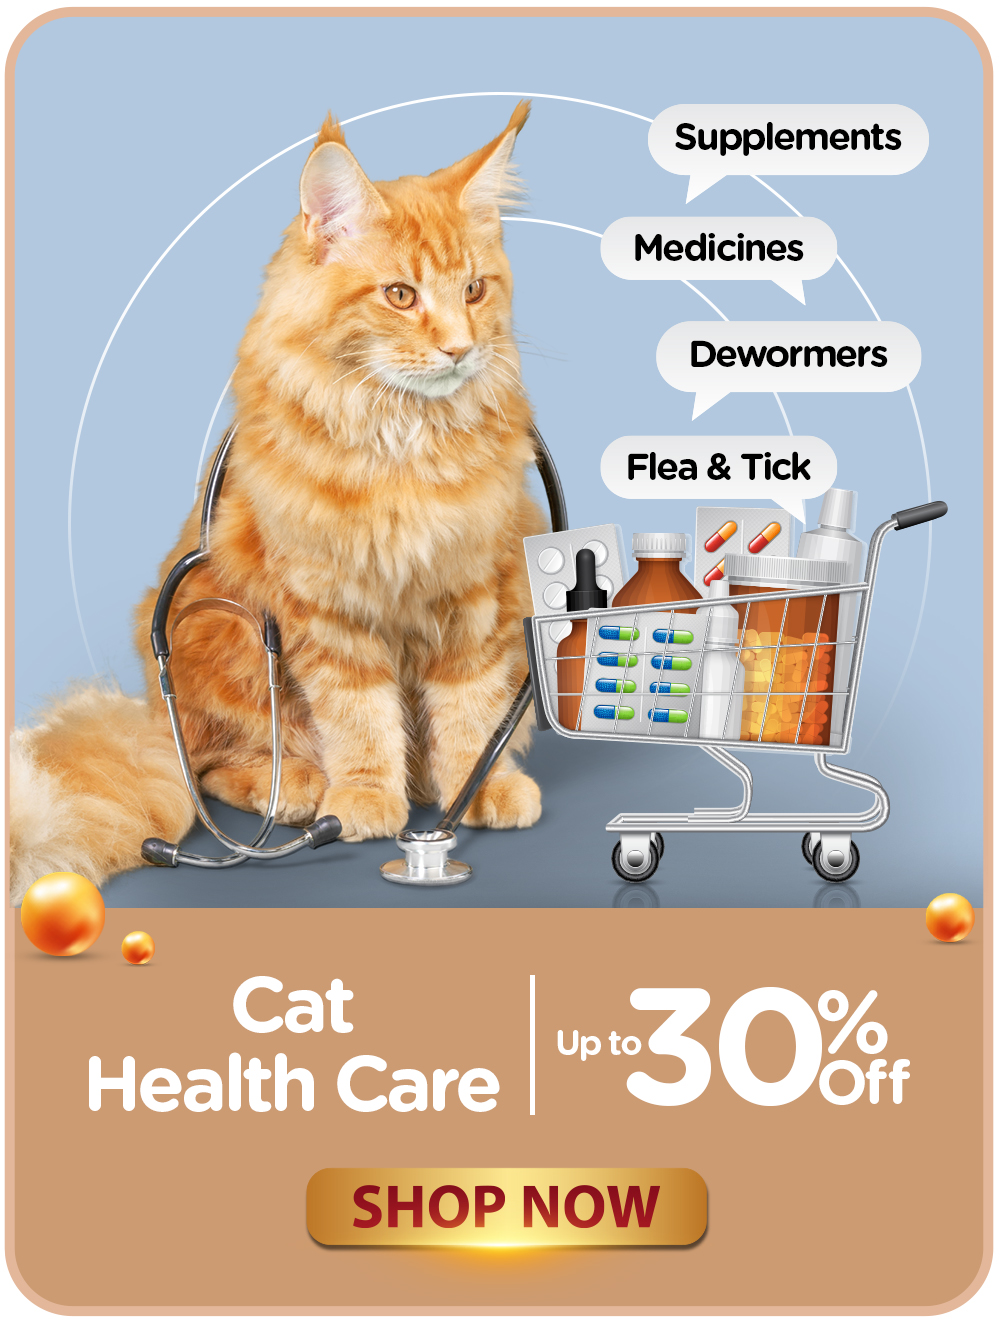 02 - CATEGORY BANNERS - CAT HEALTH CARE VER2